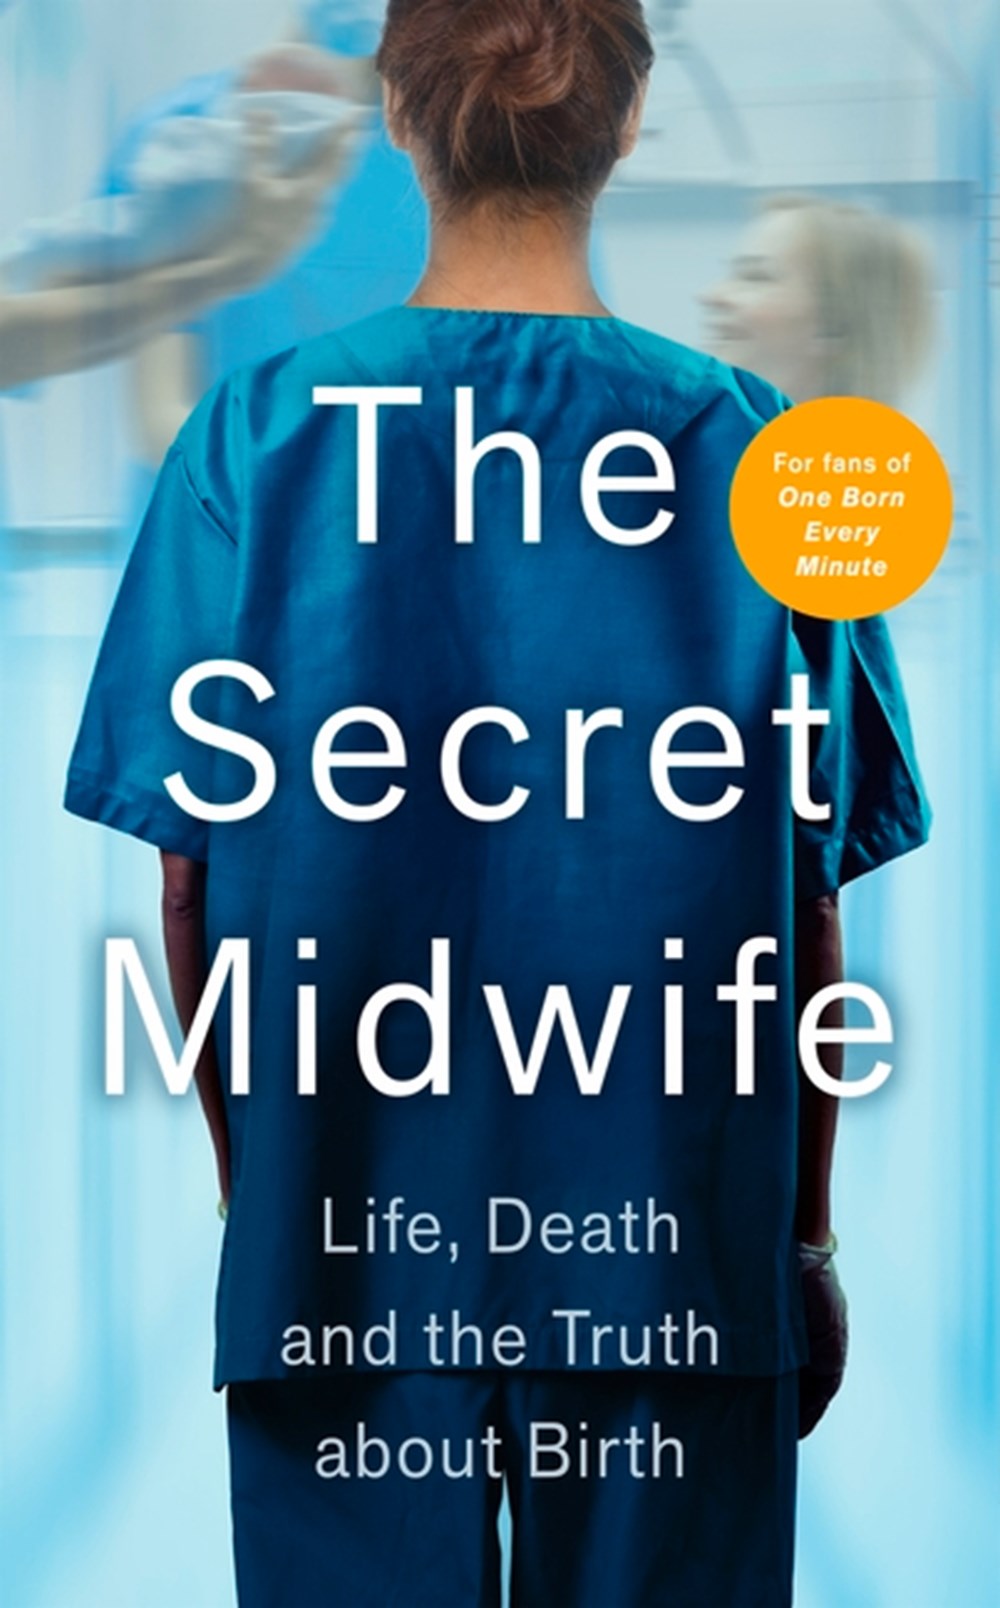 Secret Midwife Life, Death and the Truth about Birth